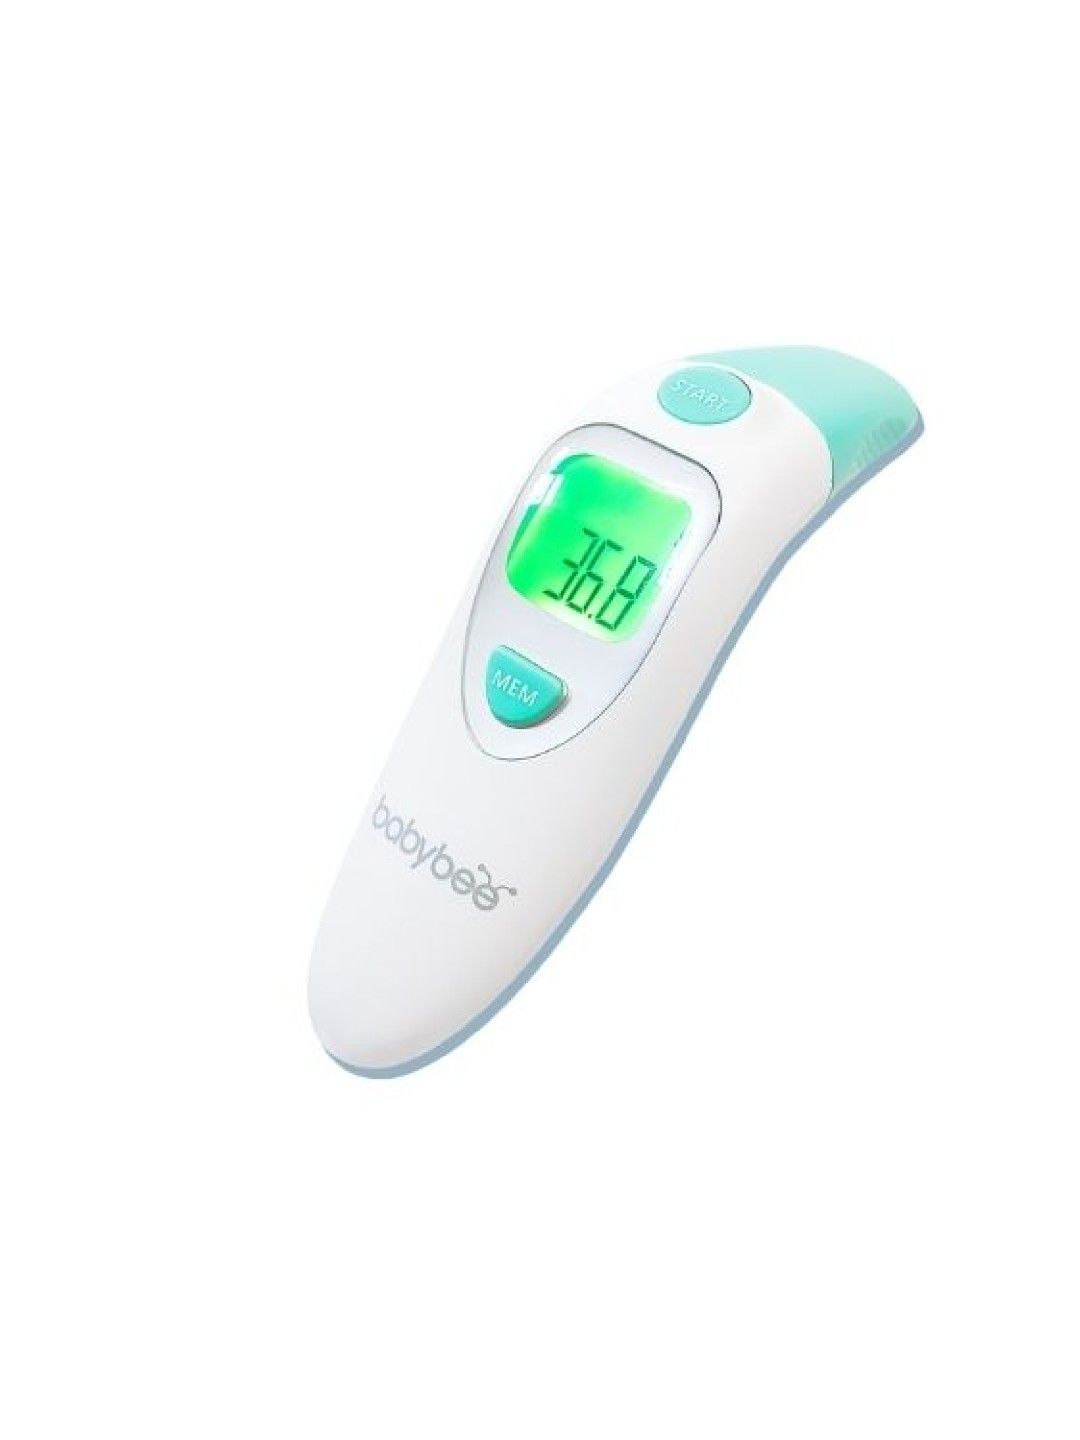 Babybee Philippines Infrared Thermometer